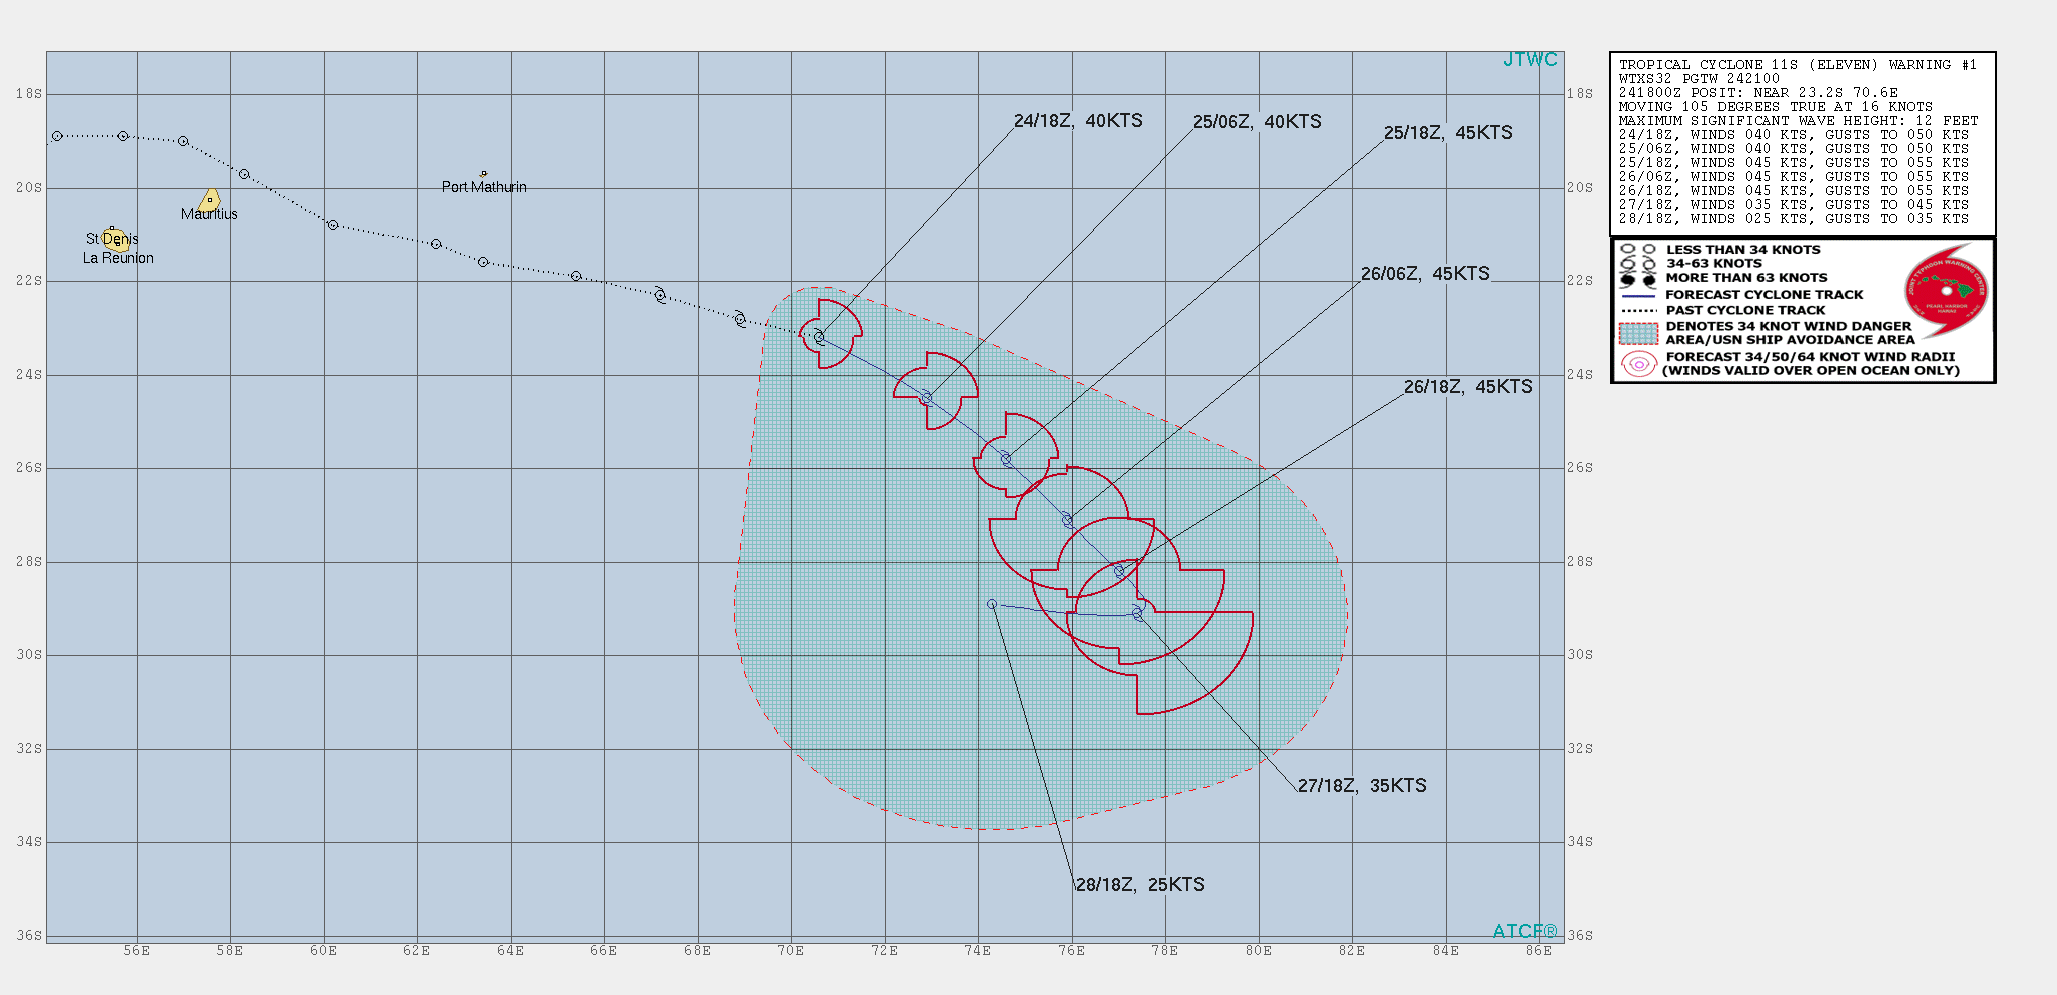 South Indian: cyclonic duo: TC 10S(DIANE) and TC 11S(97s), 10S tracking very close to Mauritius